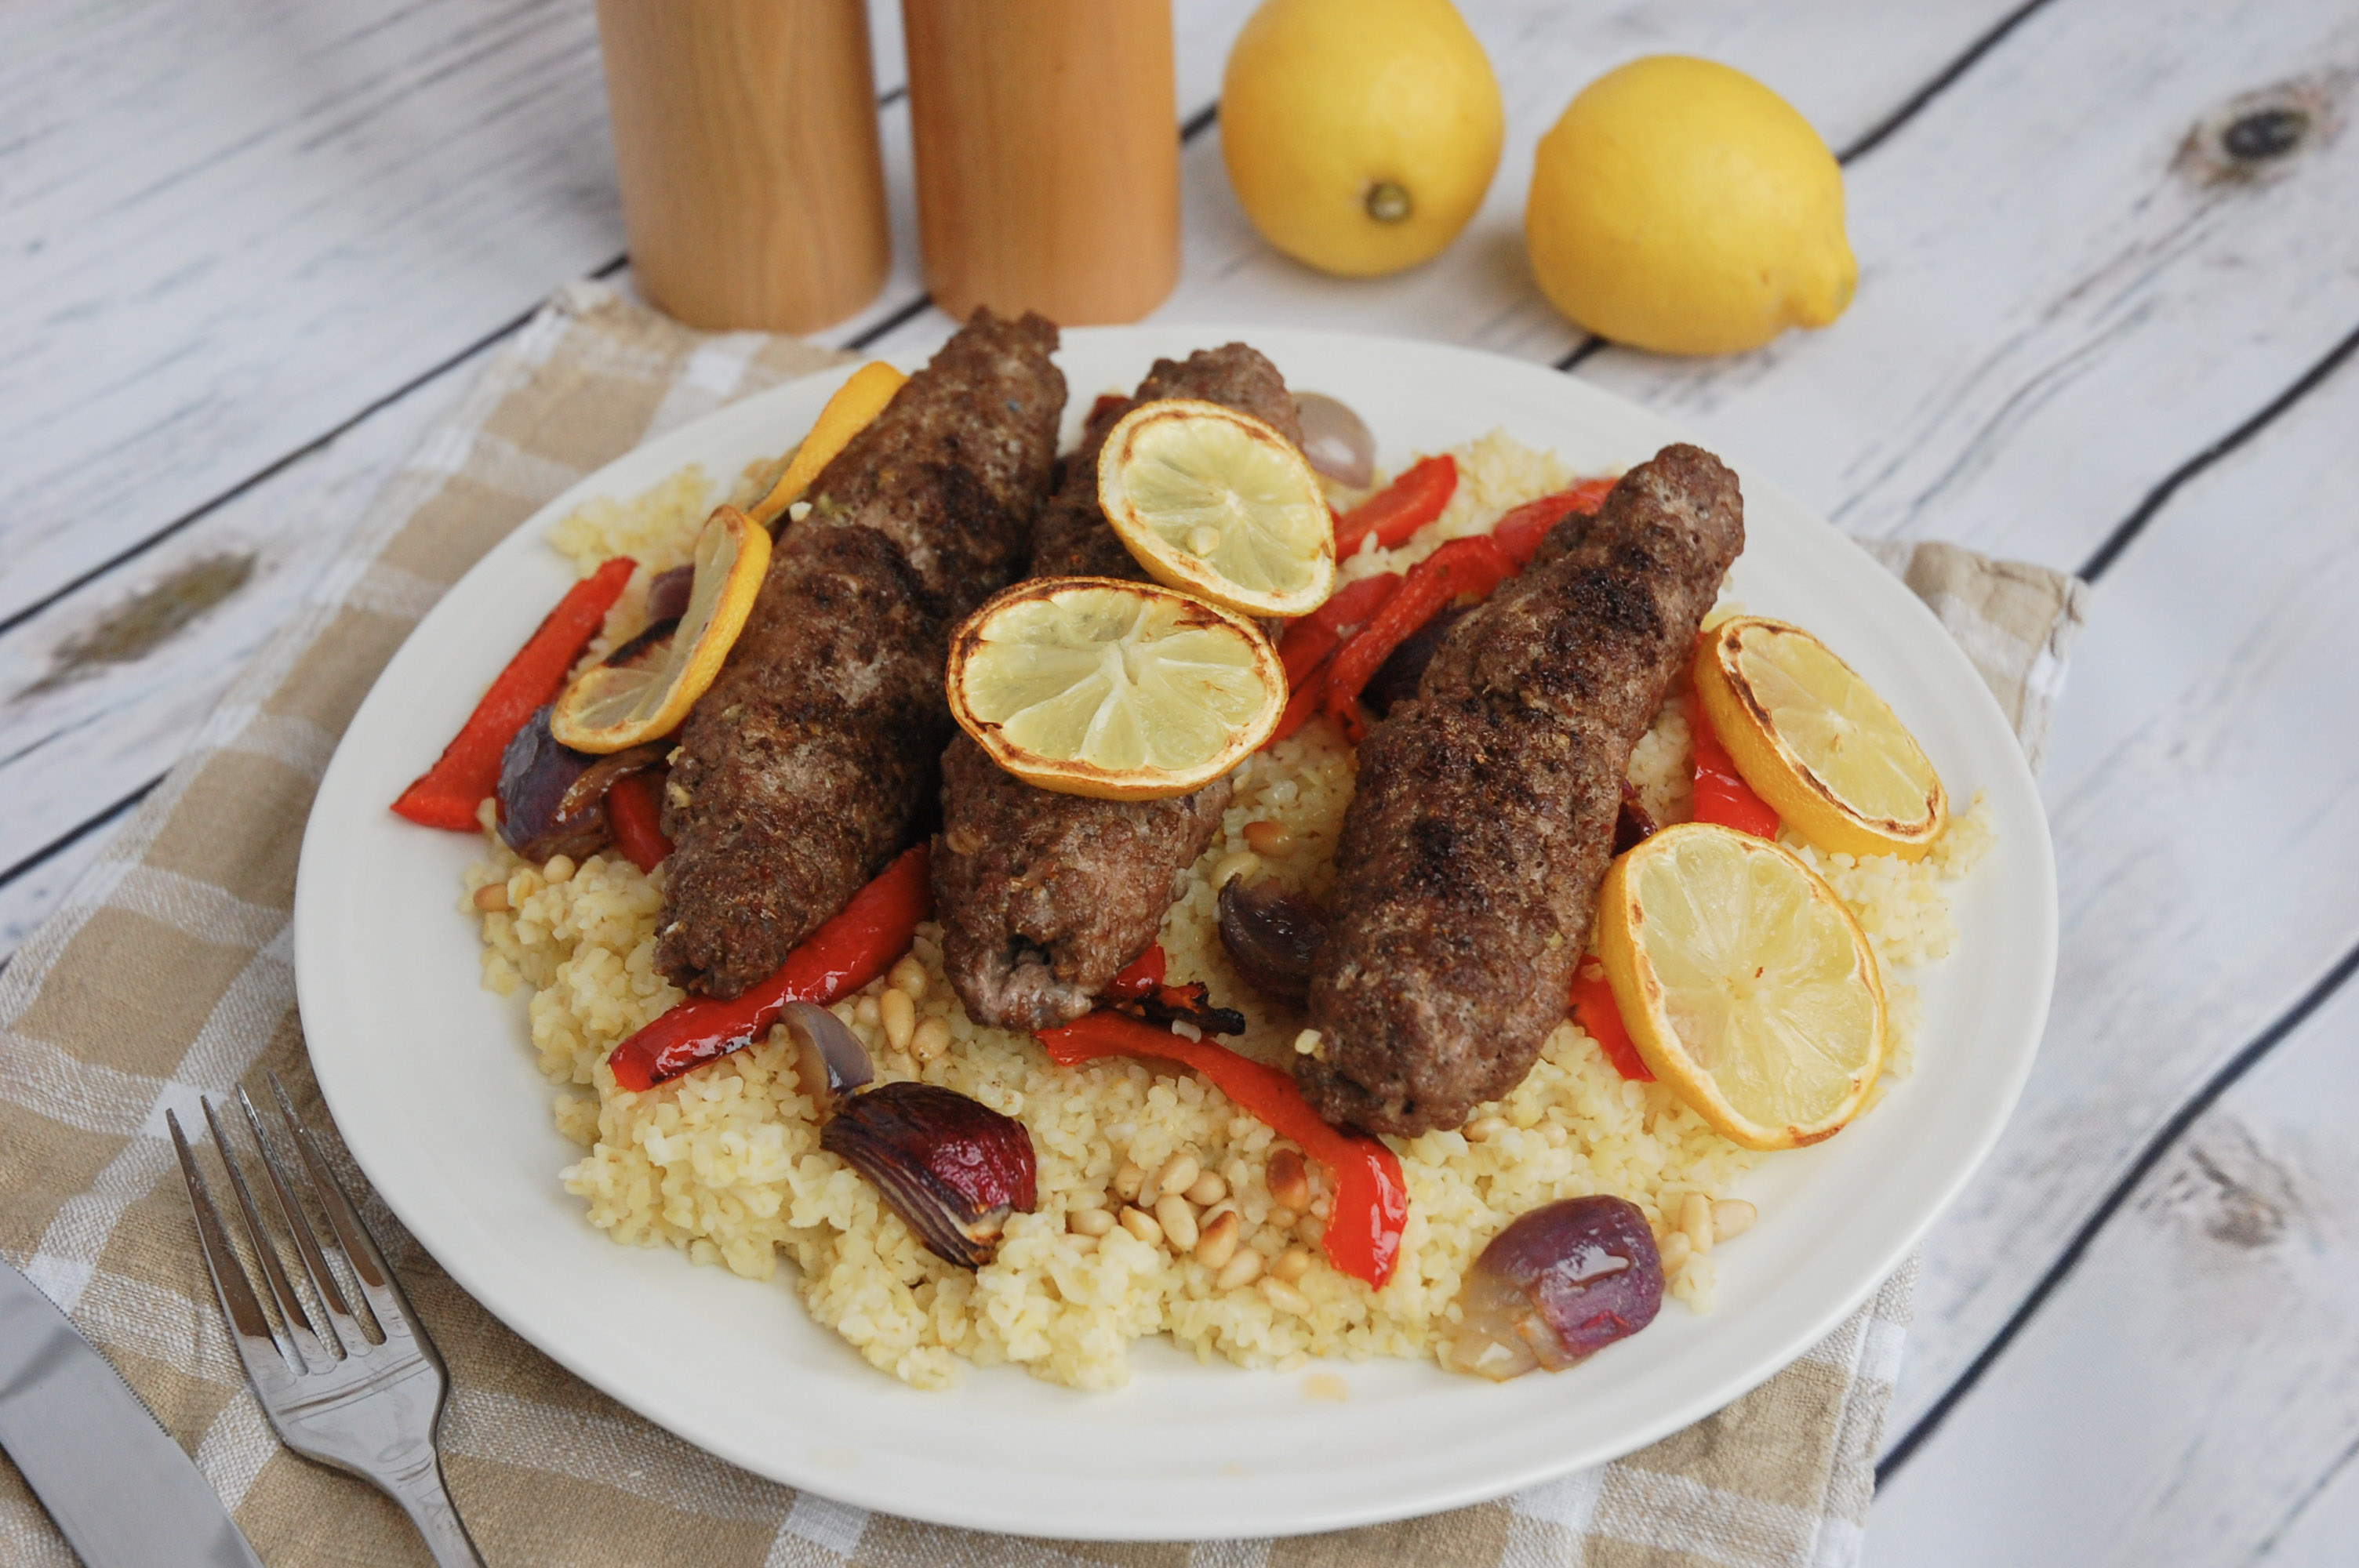 Lamb shish kebabs with grilled vegetables and bulgar wheat